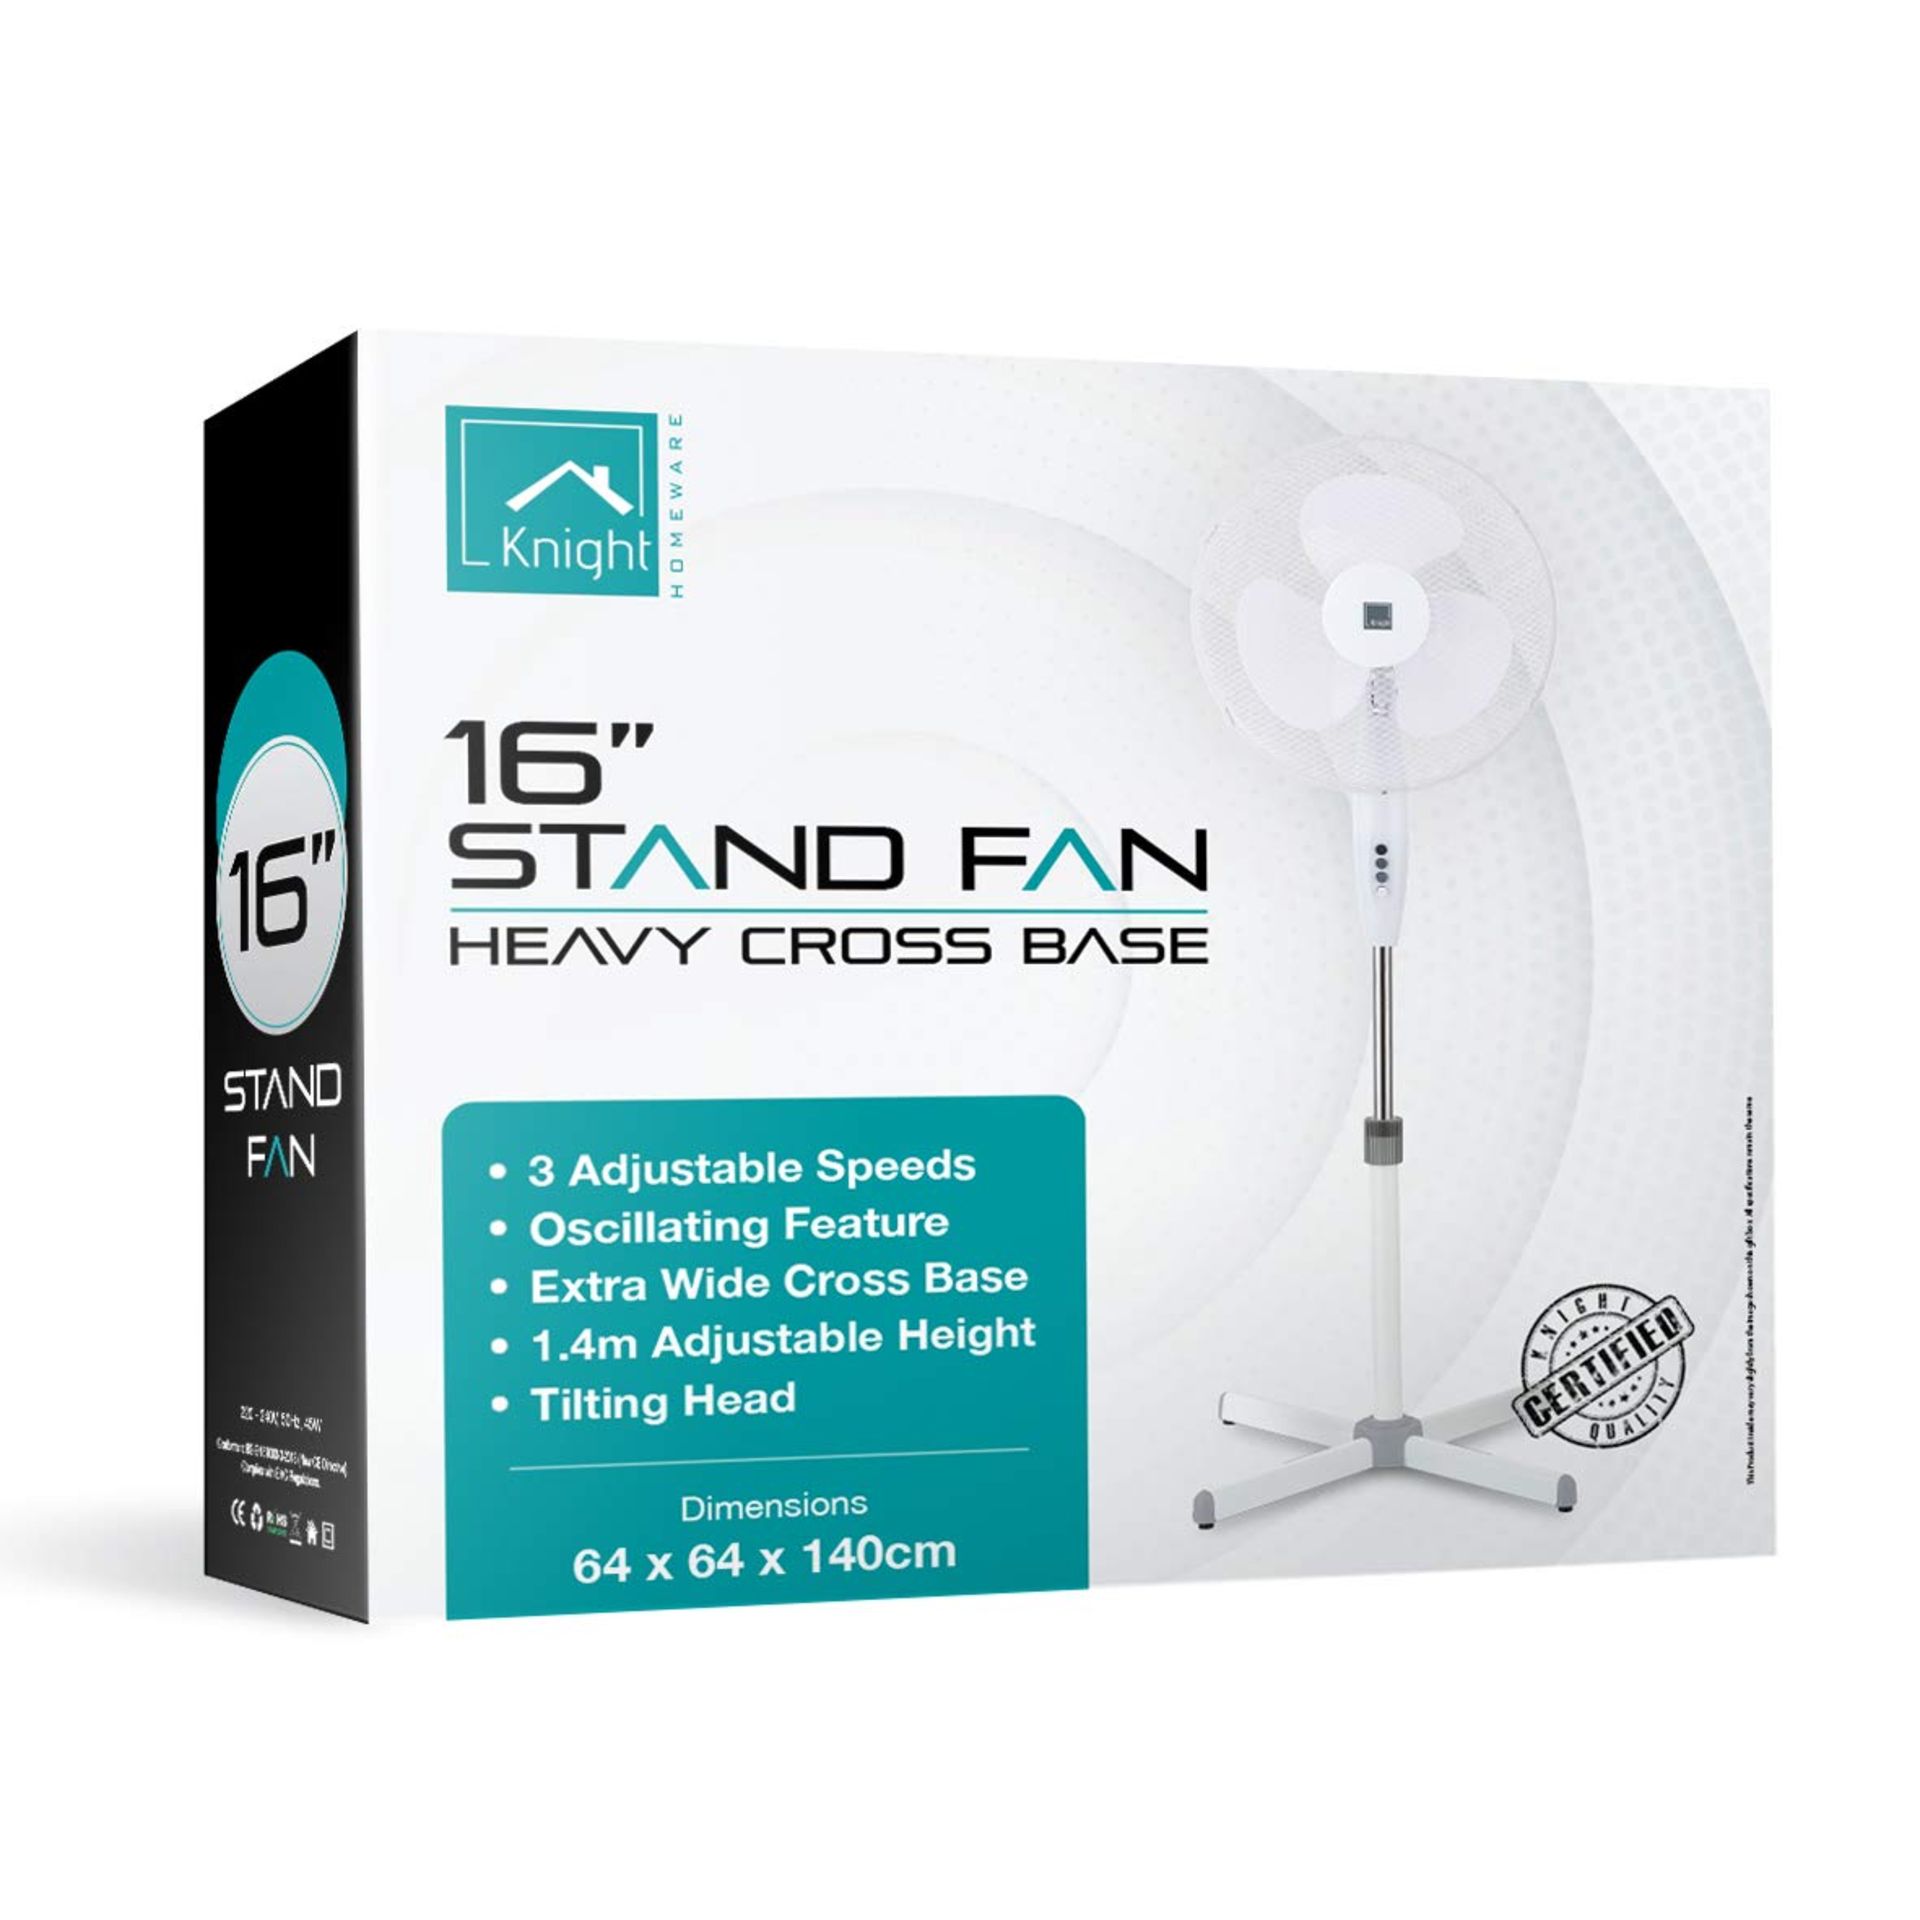 V Brand New Knight 16 Inch Stand Fan - Three Adjustable Speeds, Oscillating features And An Extra